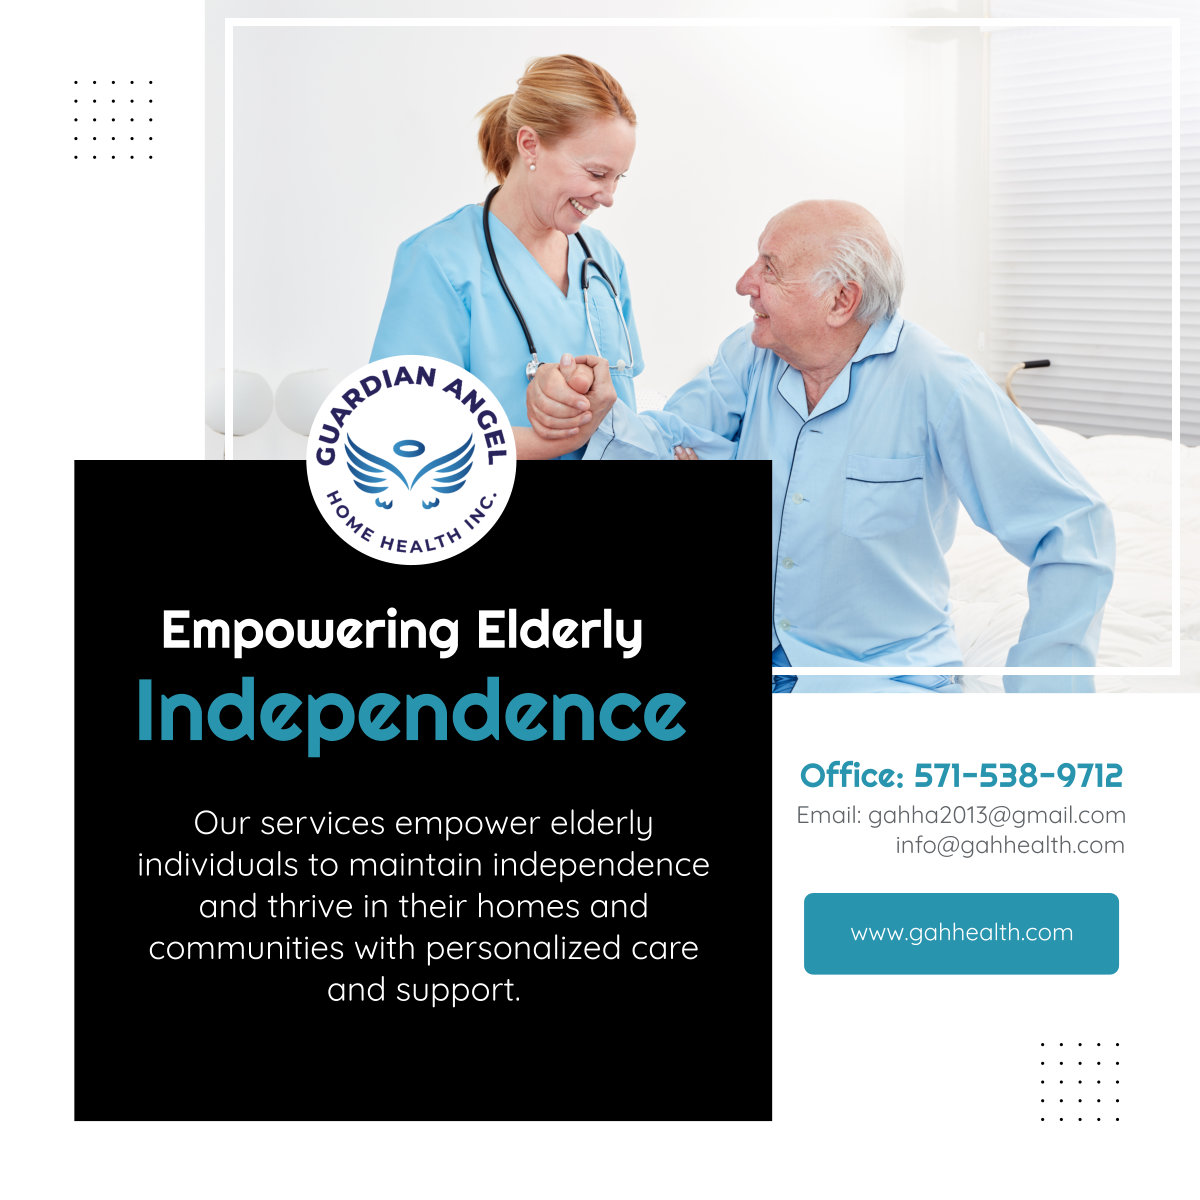 Discover how our comprehensive care services empower elderly individuals to live life on their terms, maintaining independence and dignity with the support they need.

#ElderlyCare #AlexandriaVA #HomeHealthCare